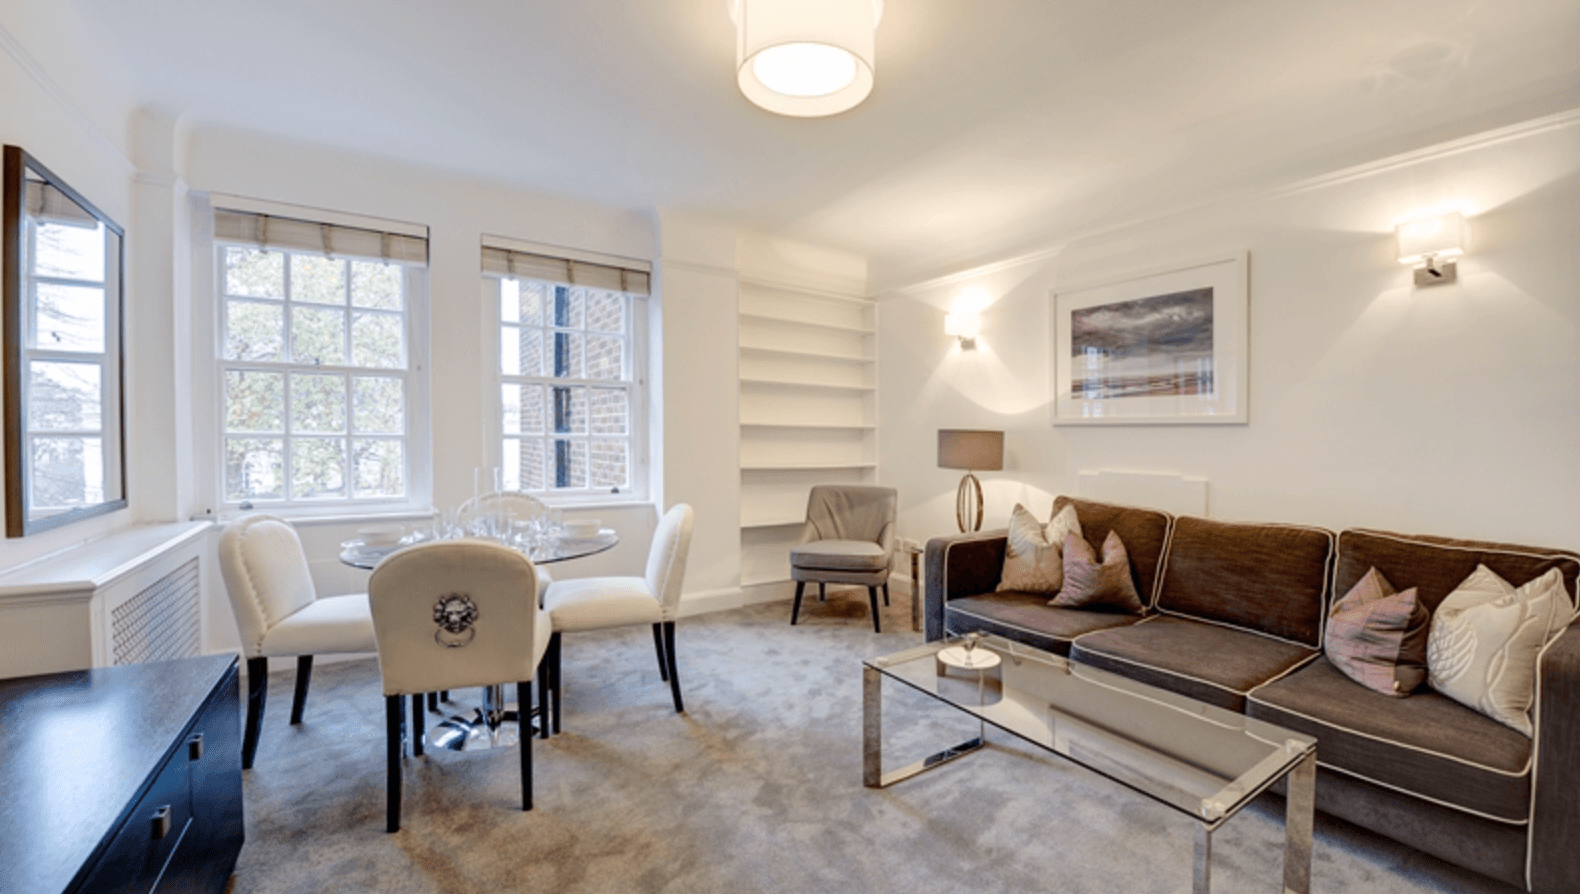 Bright and spacious two bedroom two bathroom apartment South Kensington